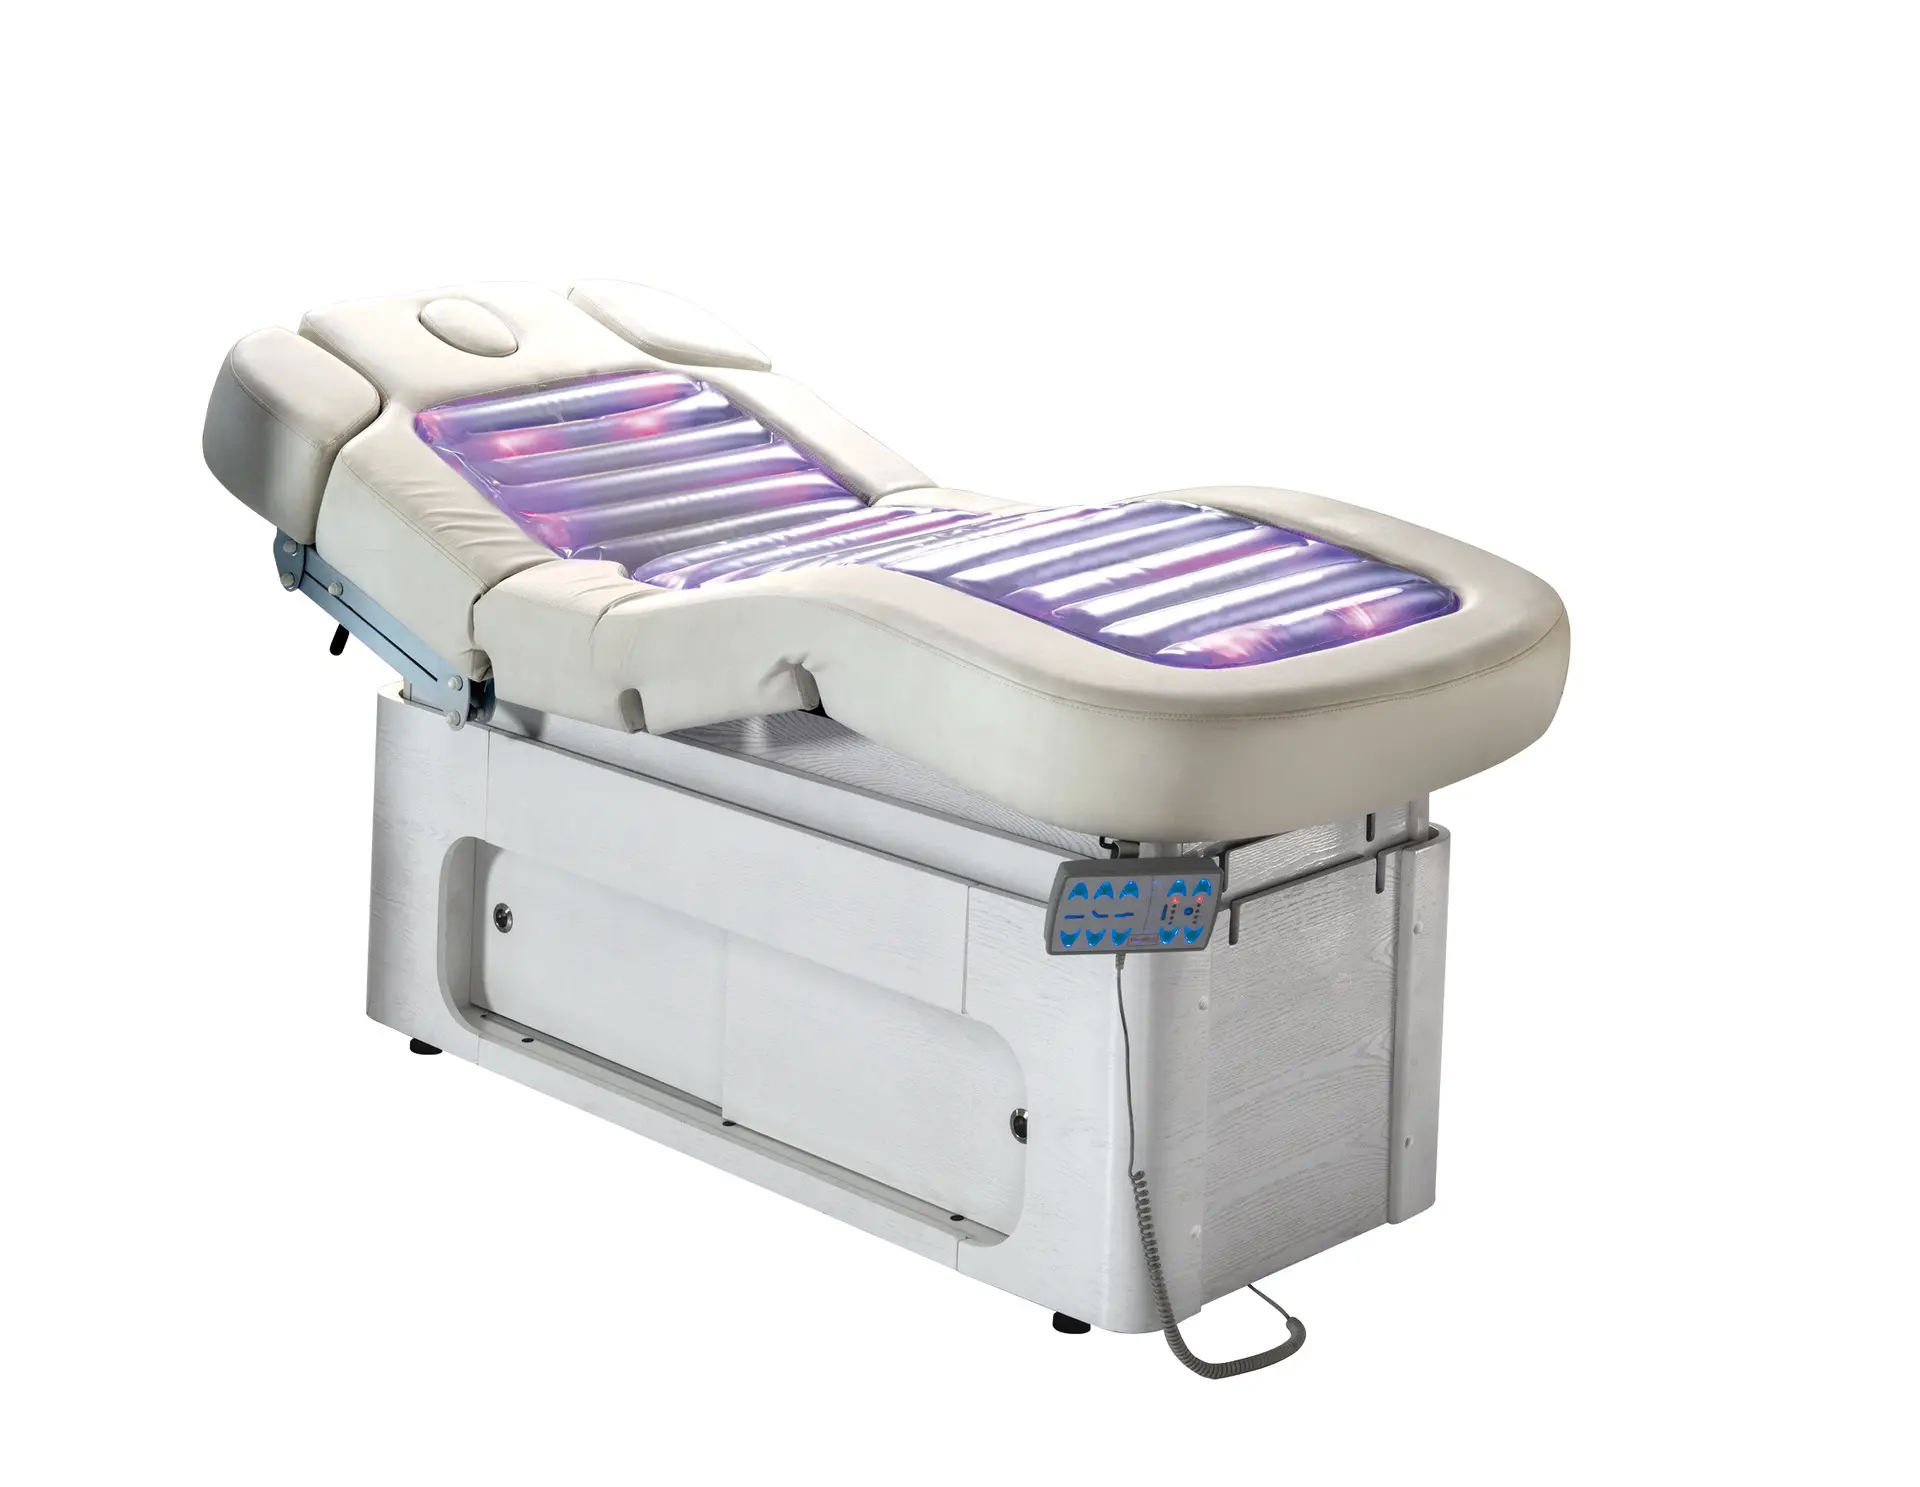 Folding Bed Led Light Electric 4 Motor Heated Function Different Level Beauty Salon Massage Table Cover For Therapy